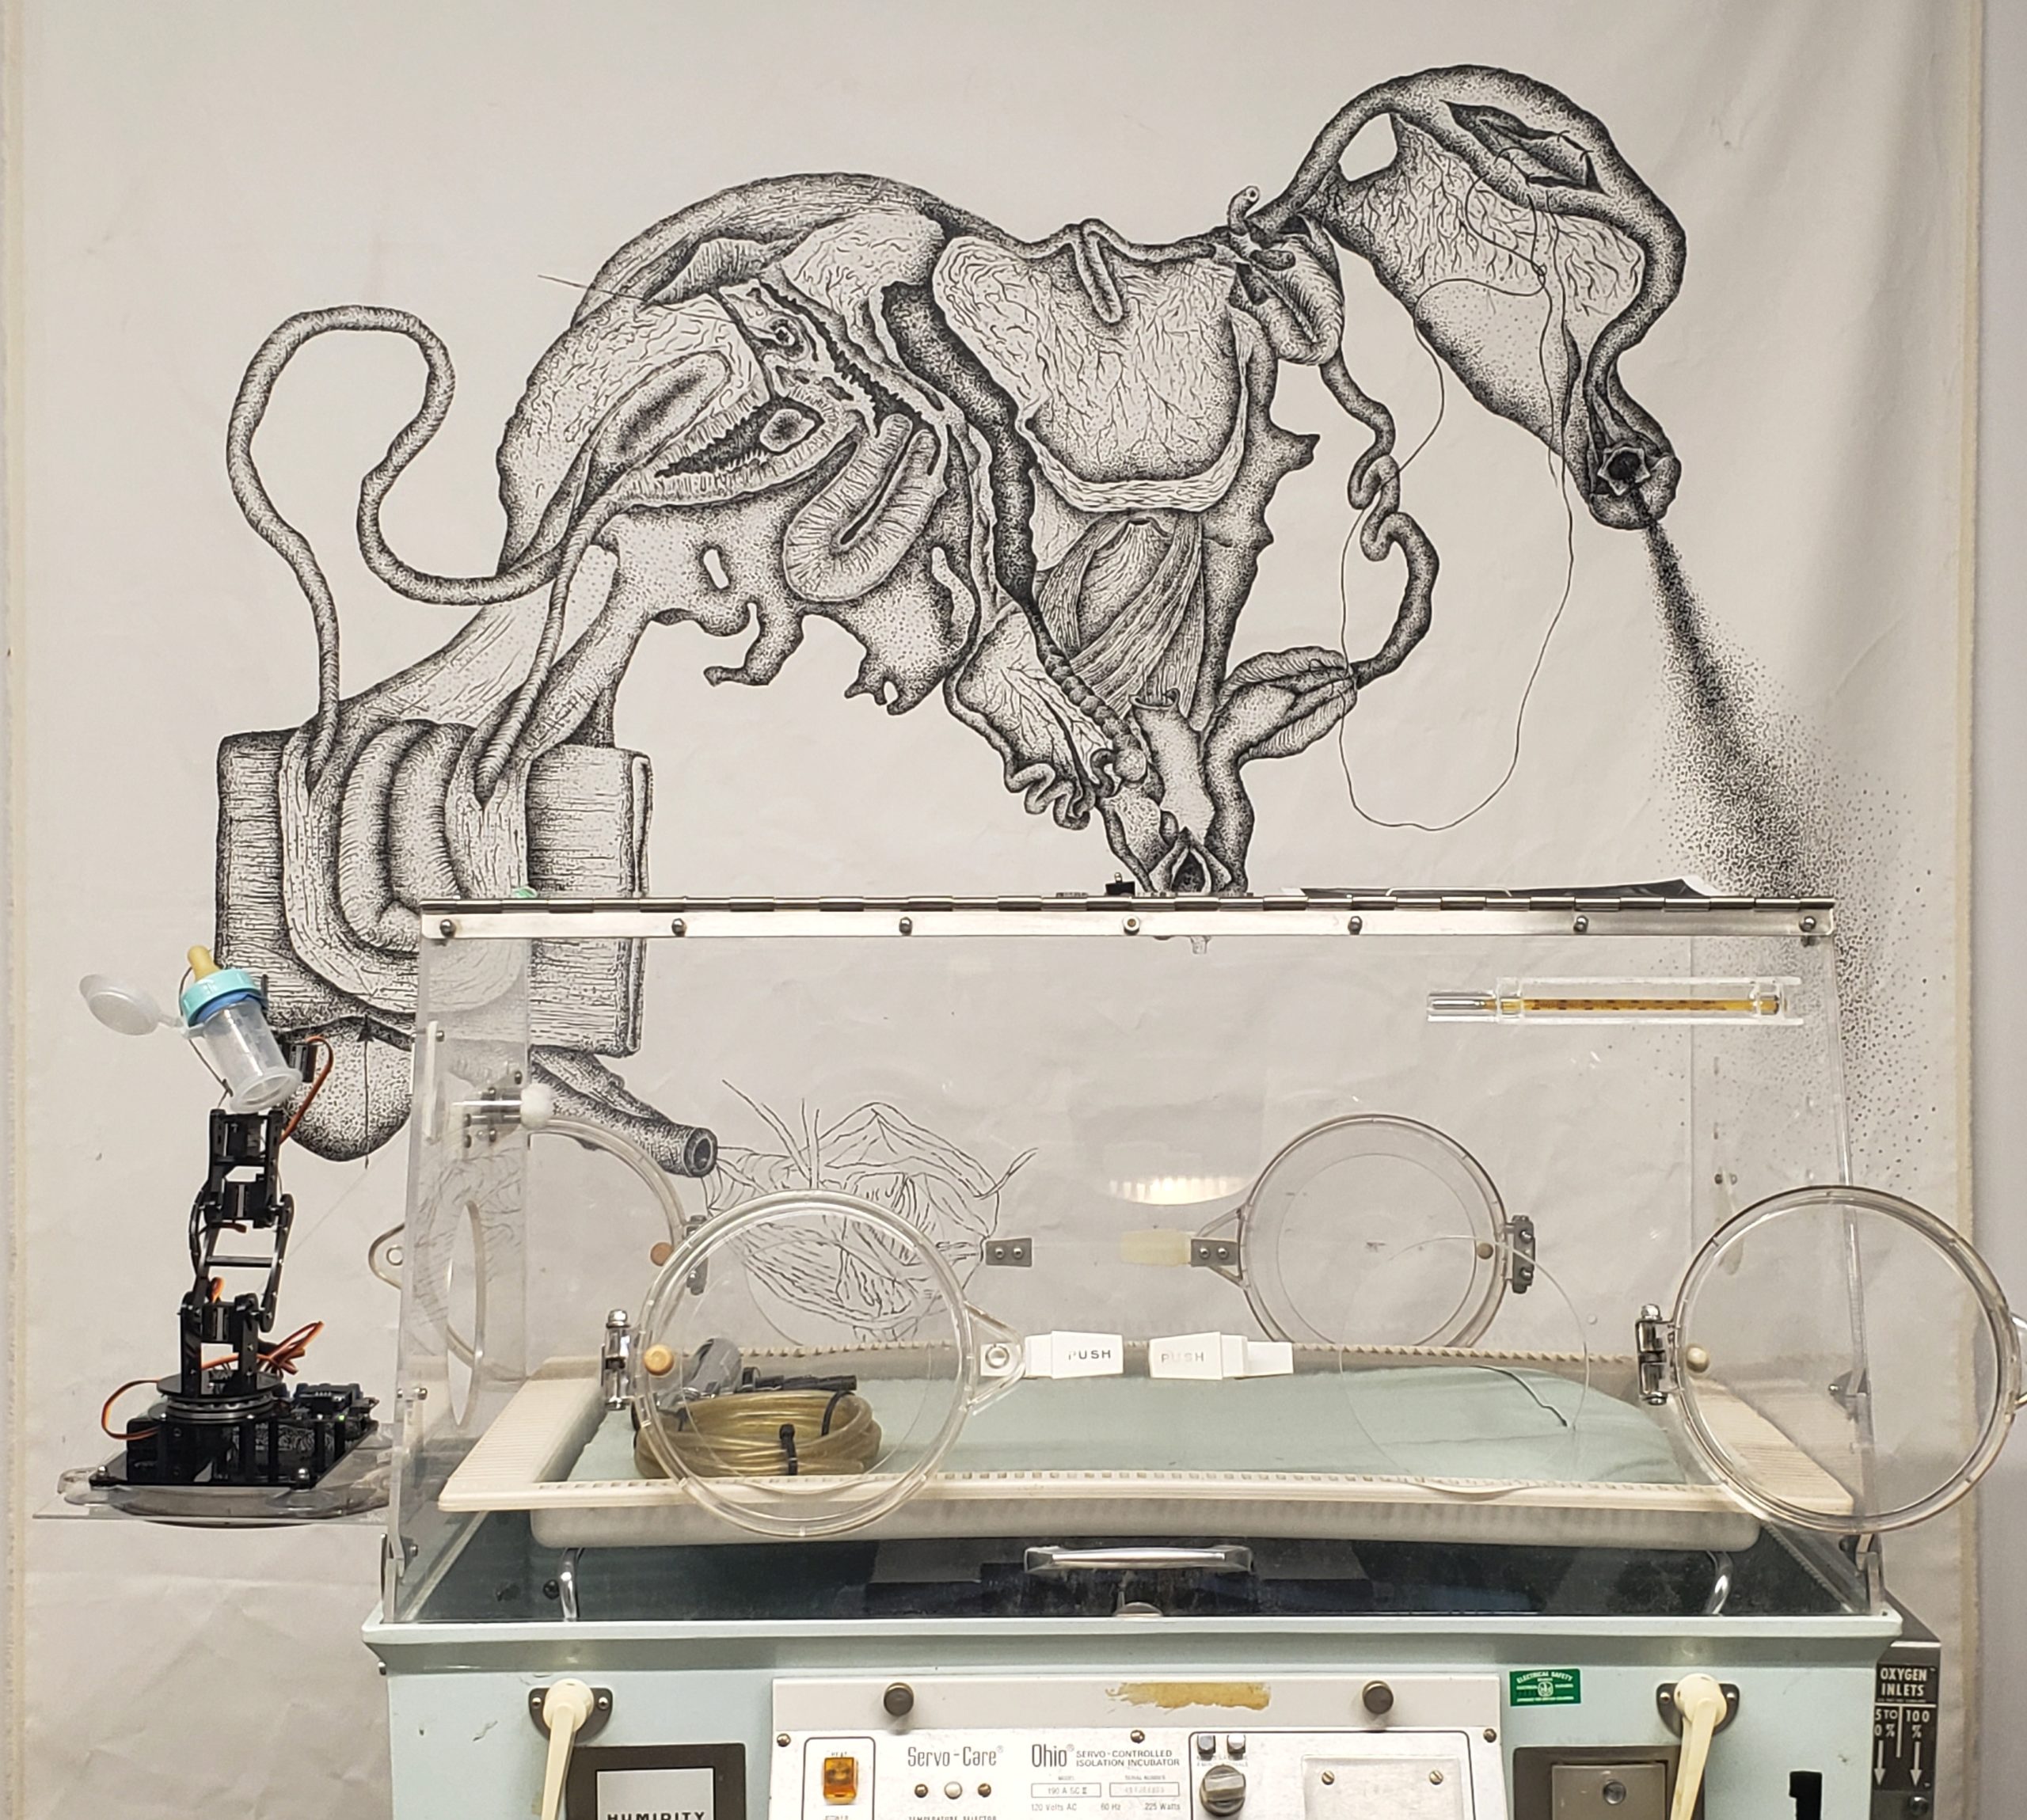 "Bio Box" installation image, a photo of an incubator with a robotic arm and background drawing of chalkboard paint on canvas.